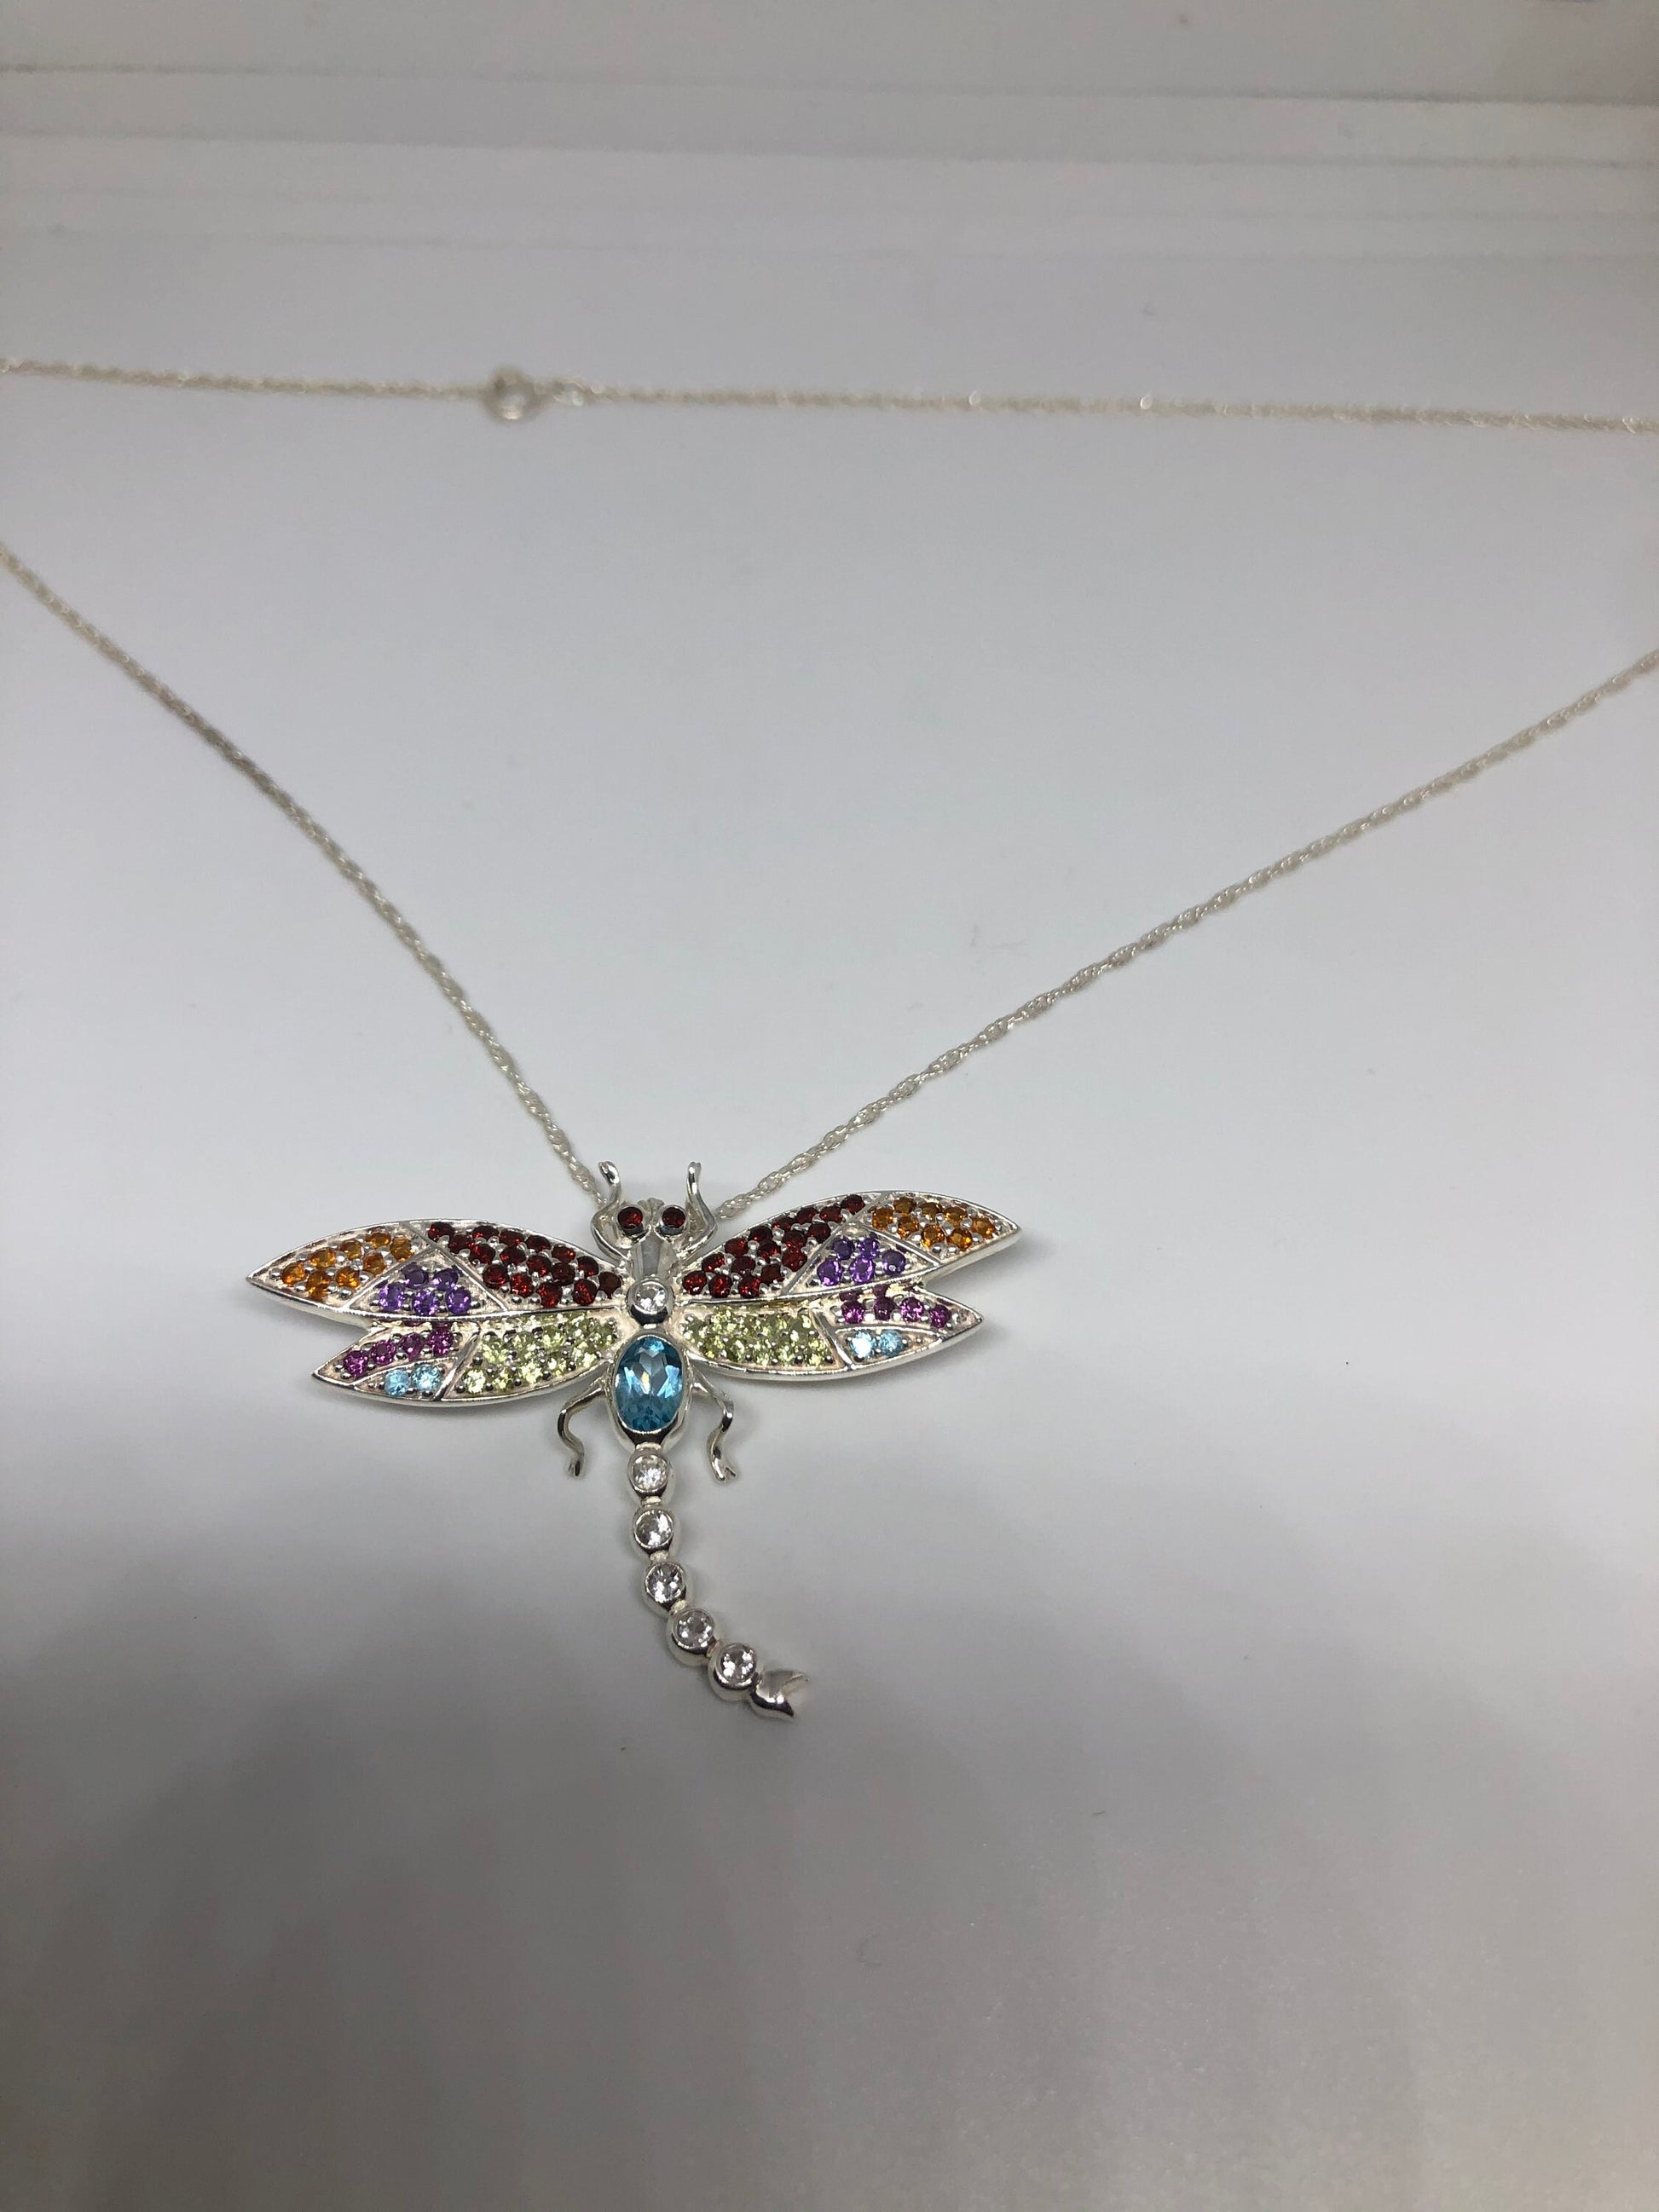 Handmade 925 Sterling Silver Vintage Dragonfly Choker Necklace